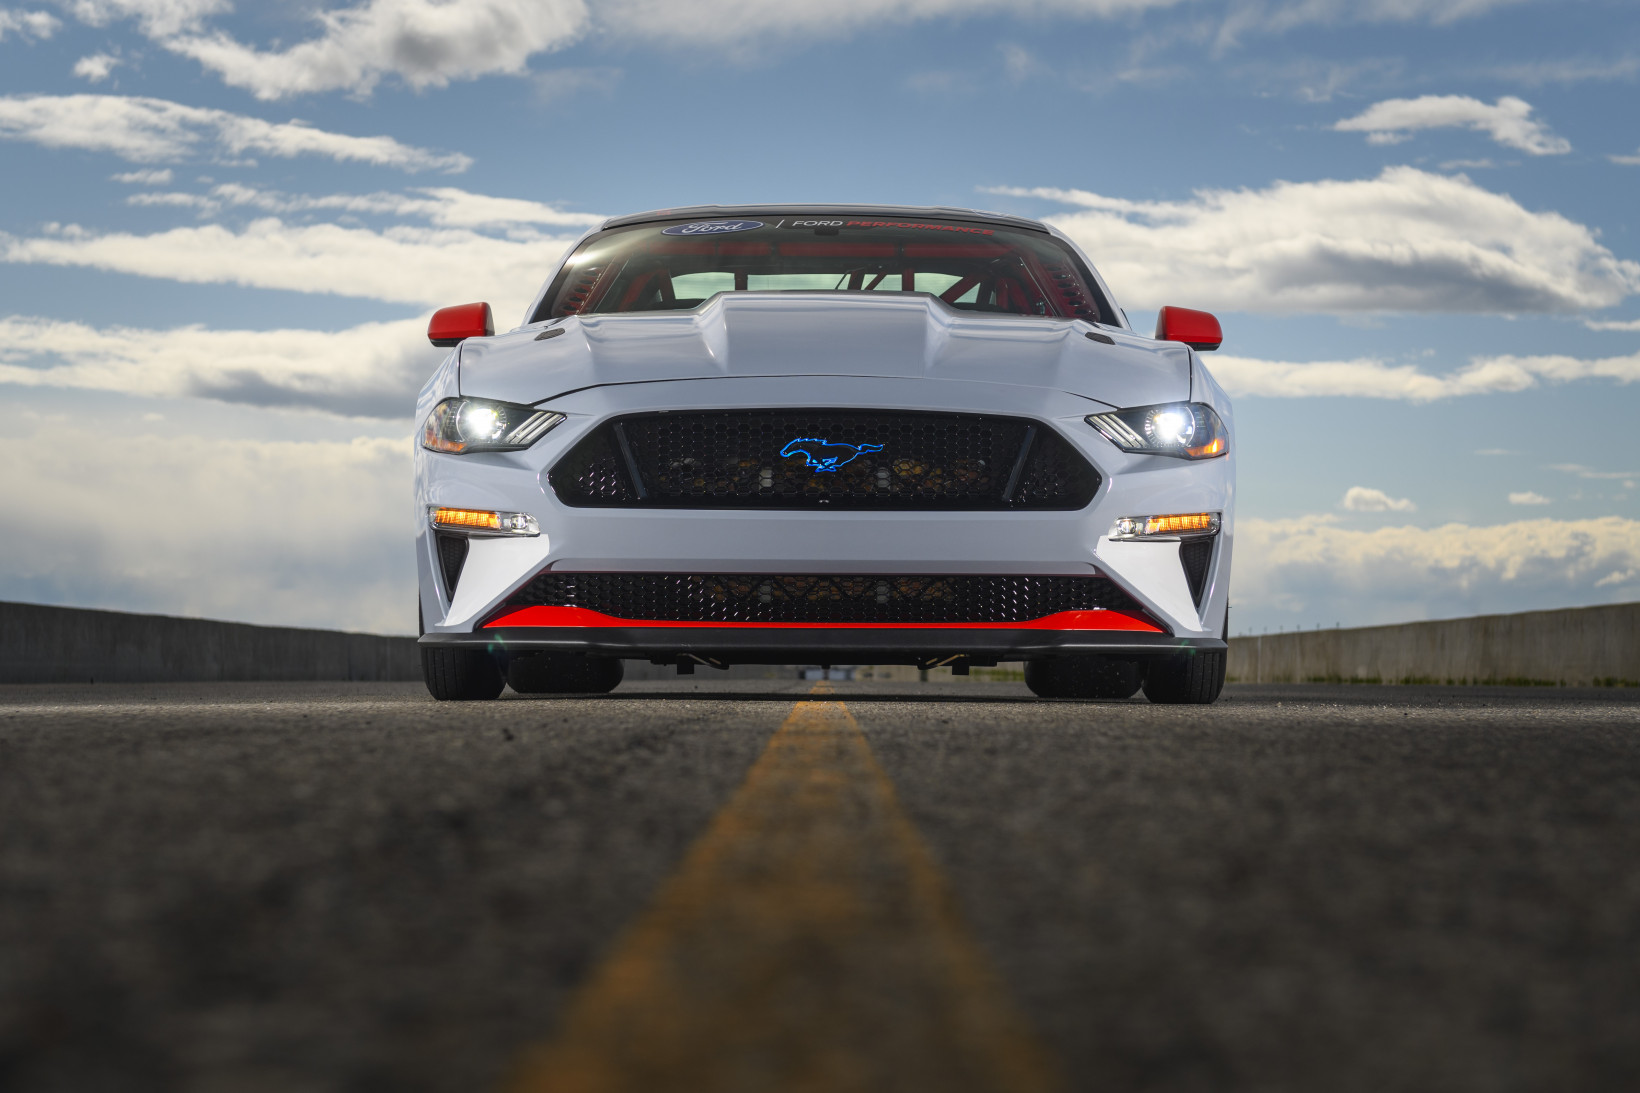 The Ford Mustang Cobra Jet 1400 prototype packs more than 1,500 hp